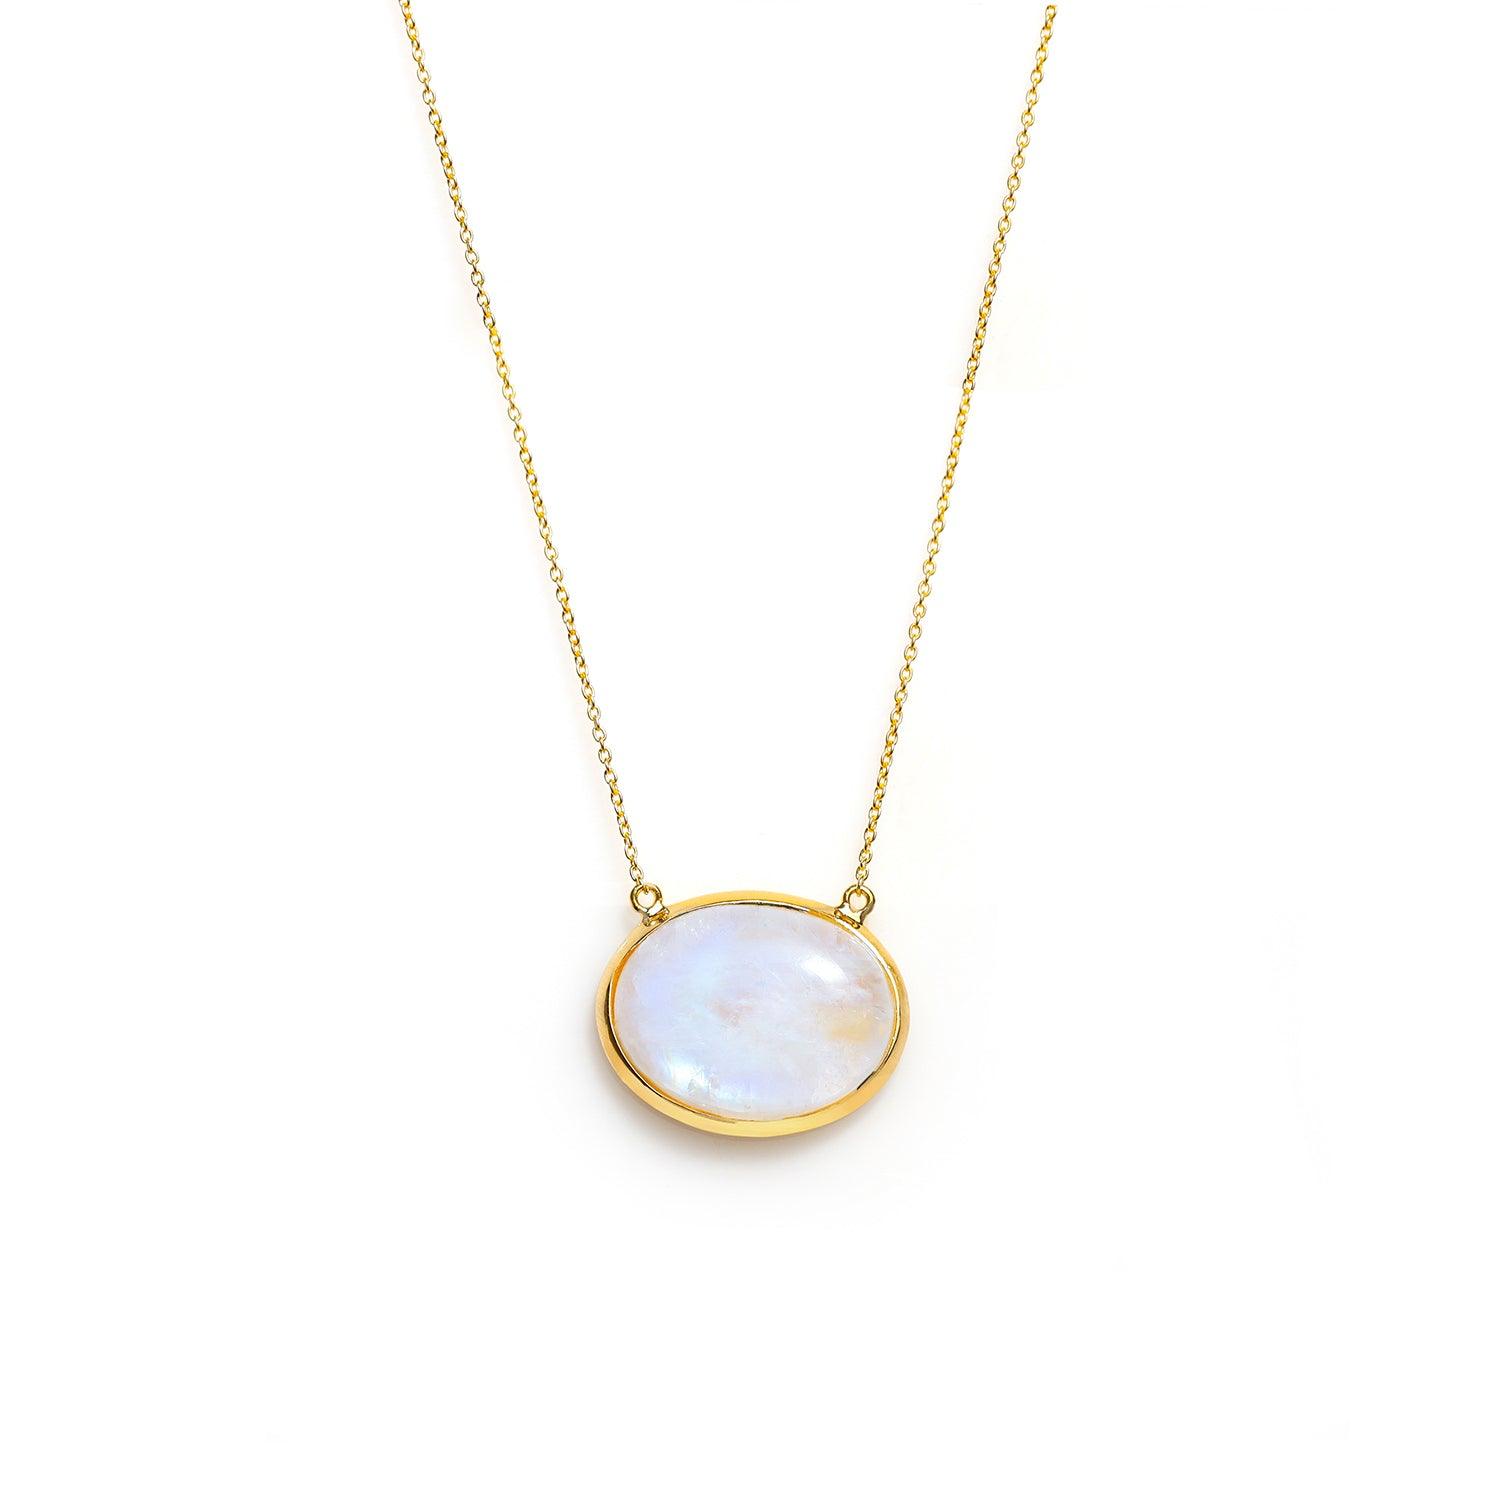 Moonstone Necklace 925 Sterling Silver Gold Plated Chain Pendant Necklace Jewelry - YoTreasure